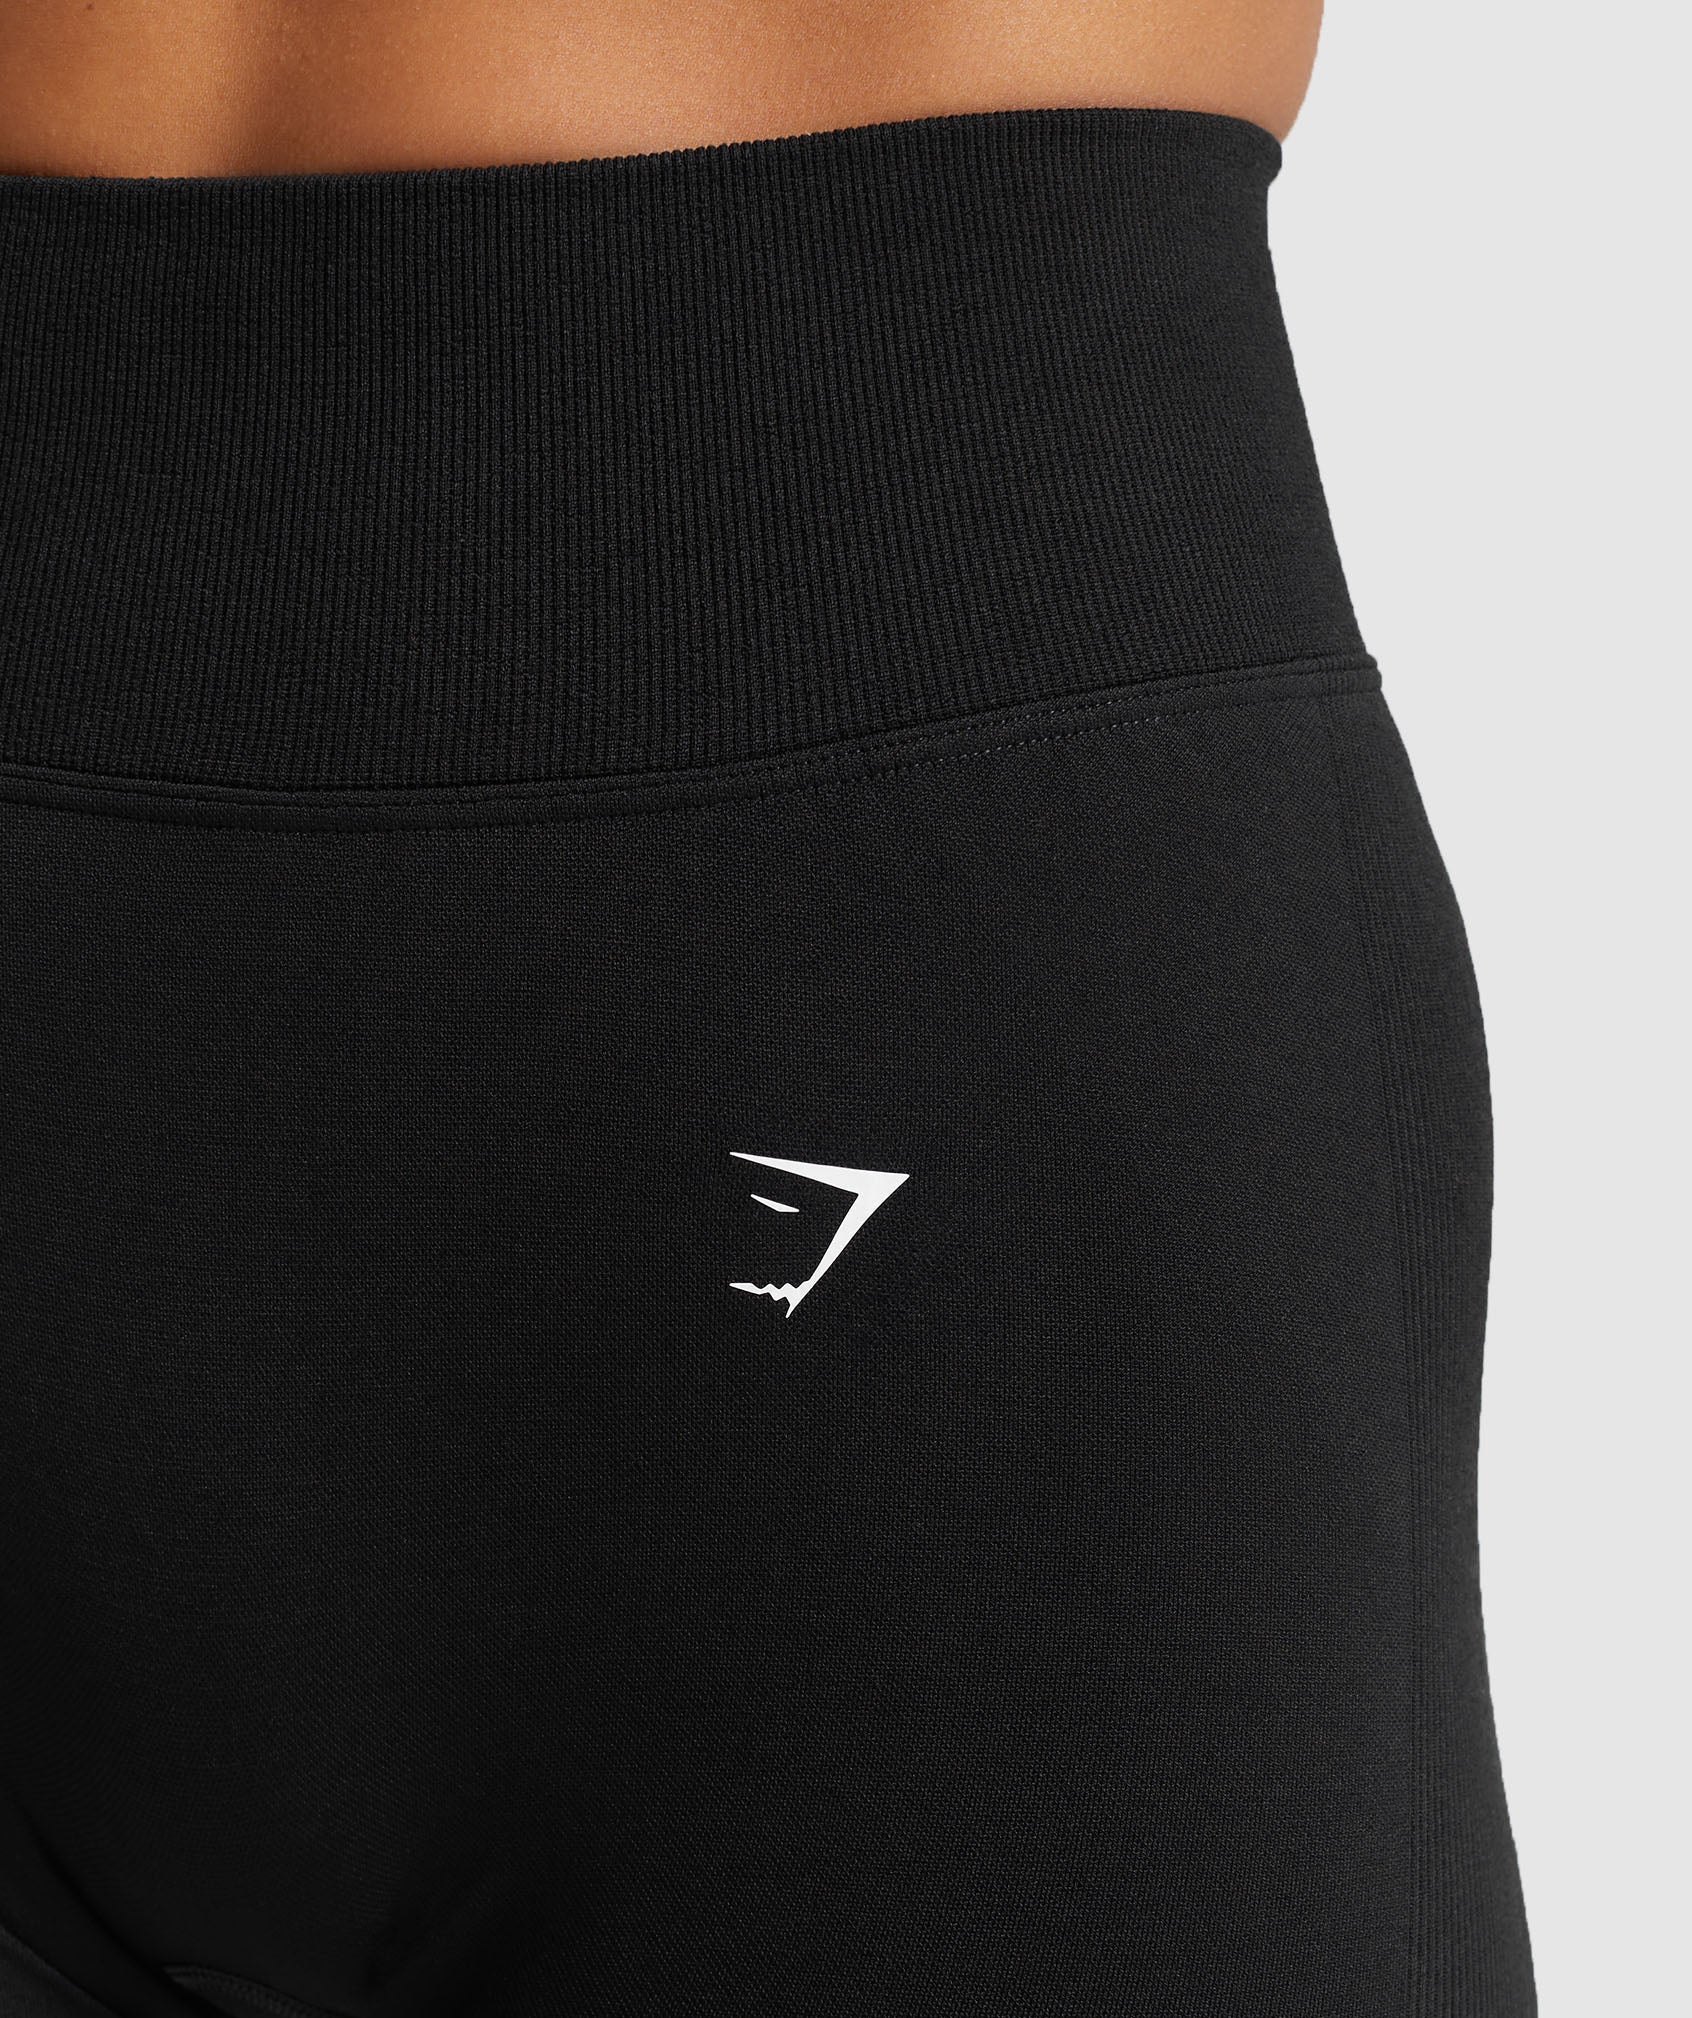 Lift Contour Seamless Shorts in Black/Black Marl - view 6